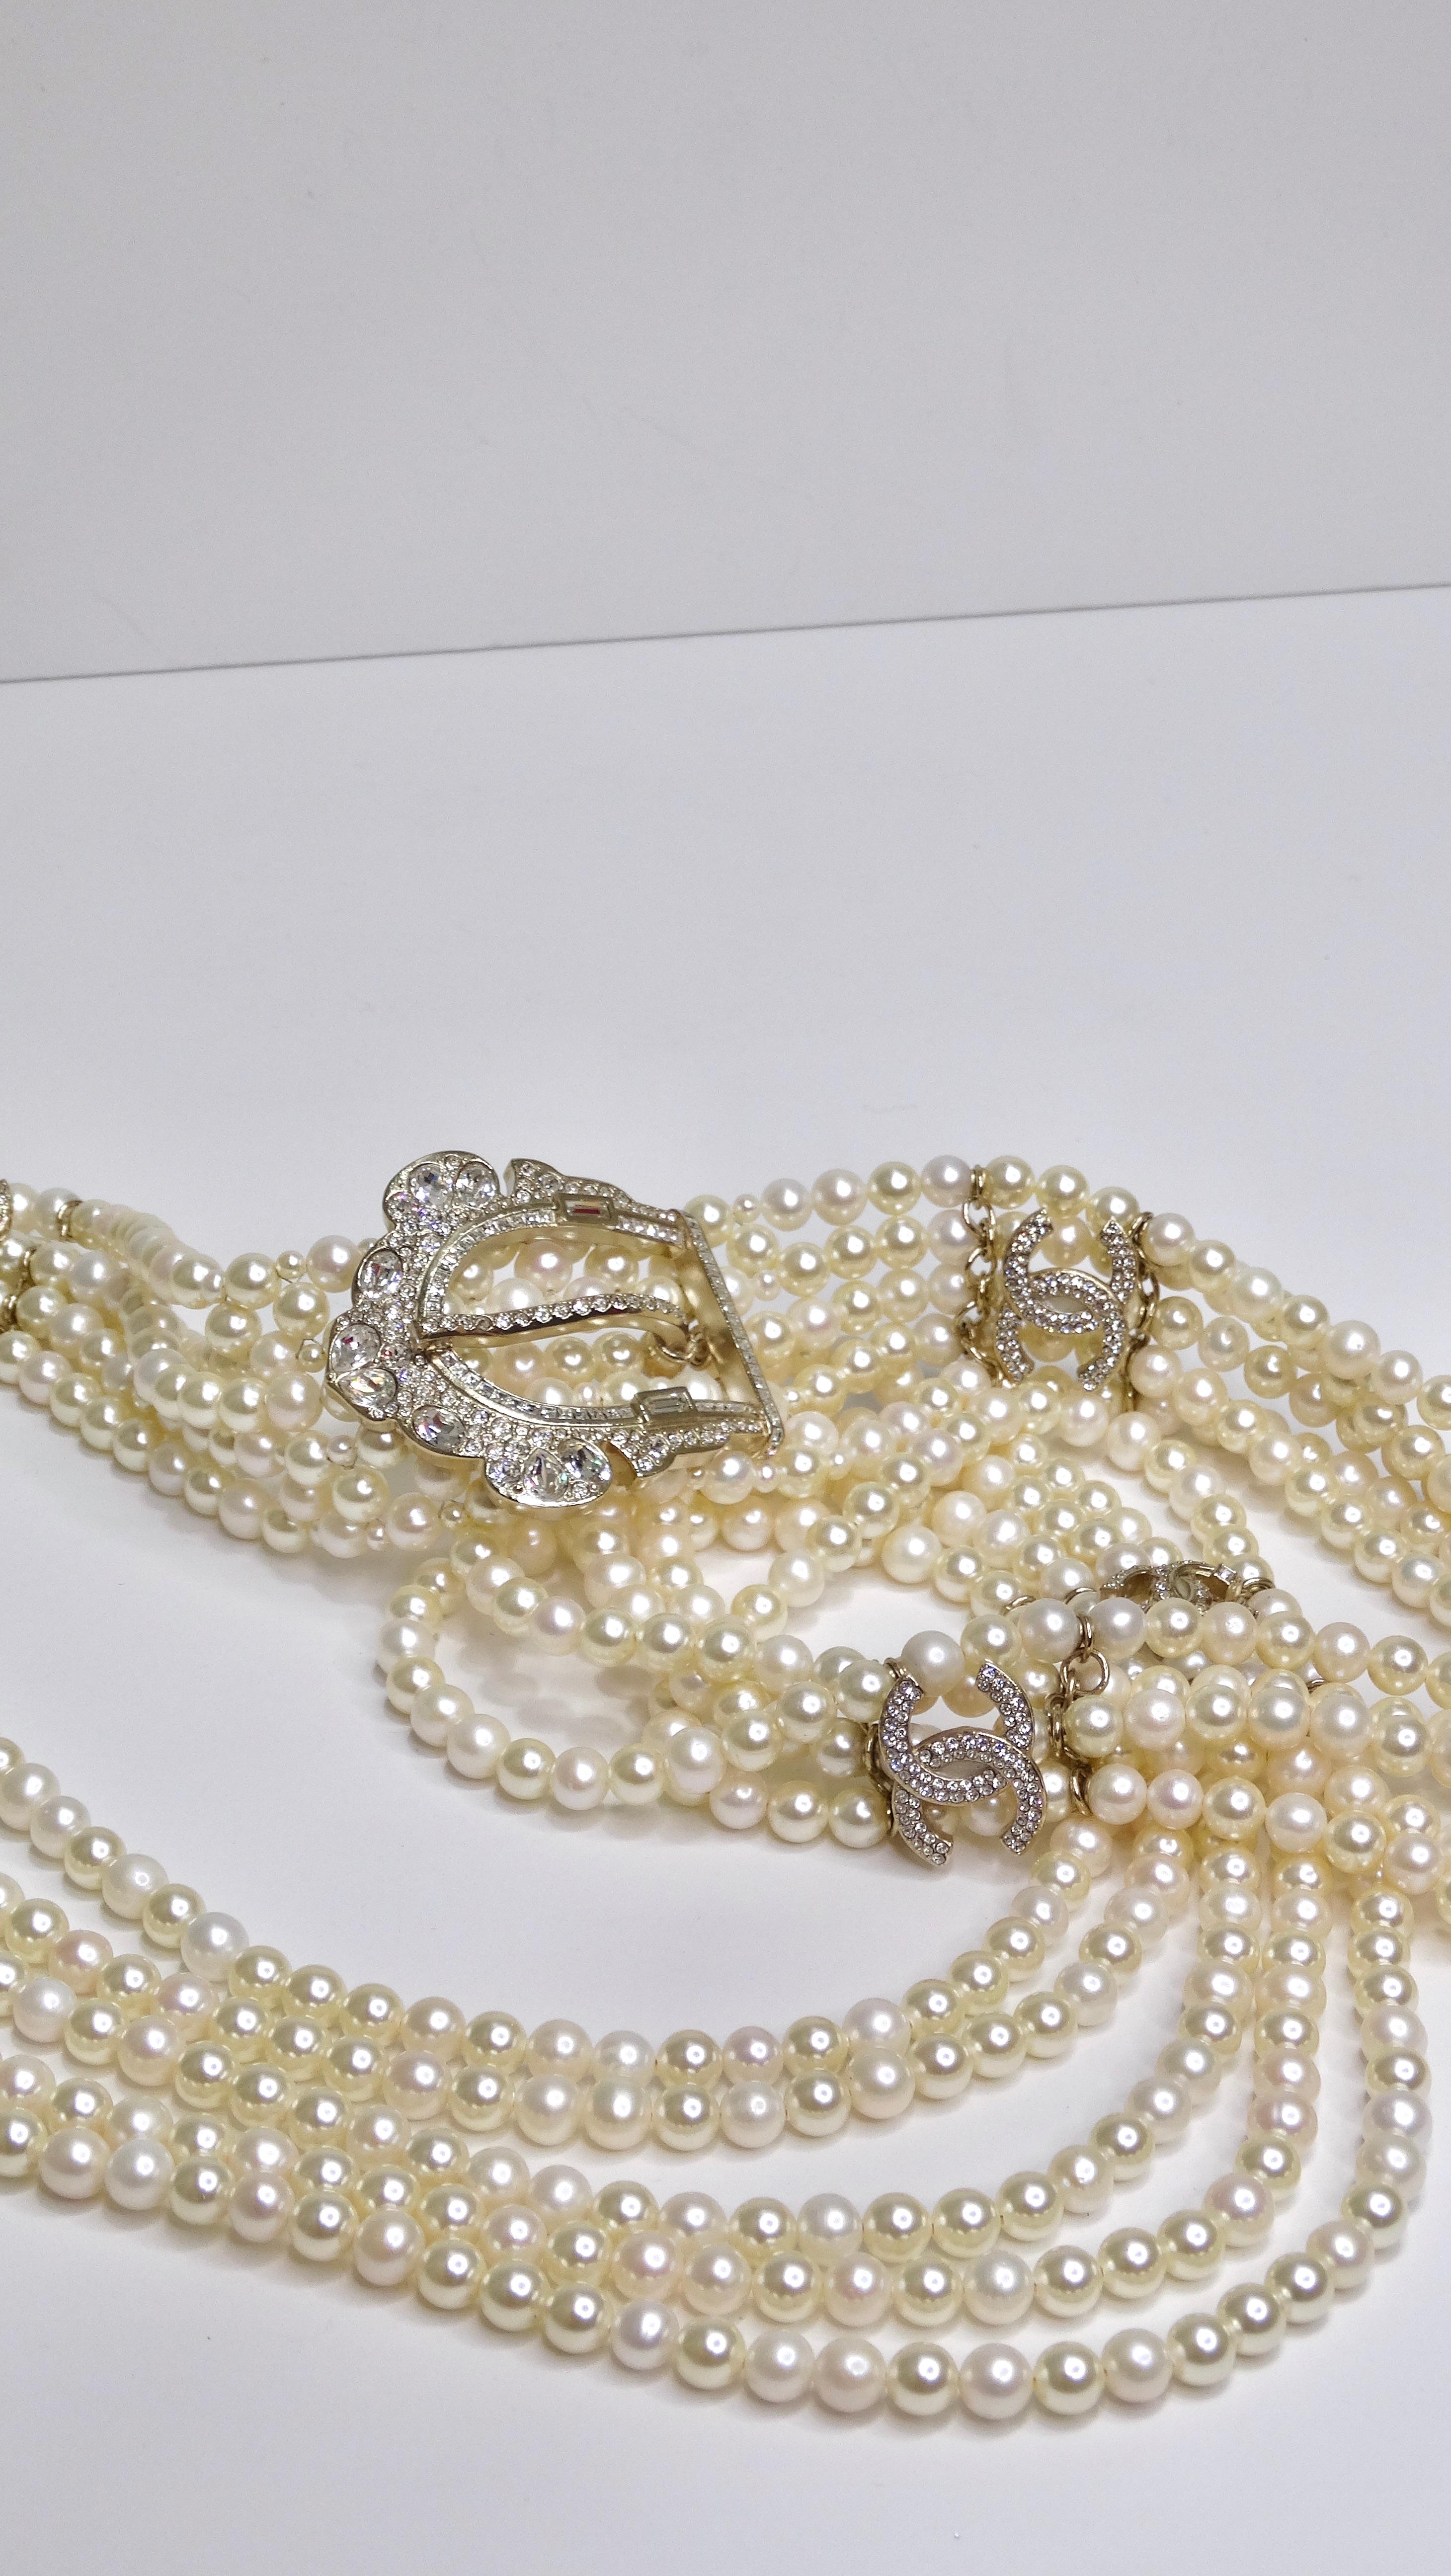 Women's or Men's Chanel Pearls & Crystal Buckle Multi-Strand Necklace For Sale